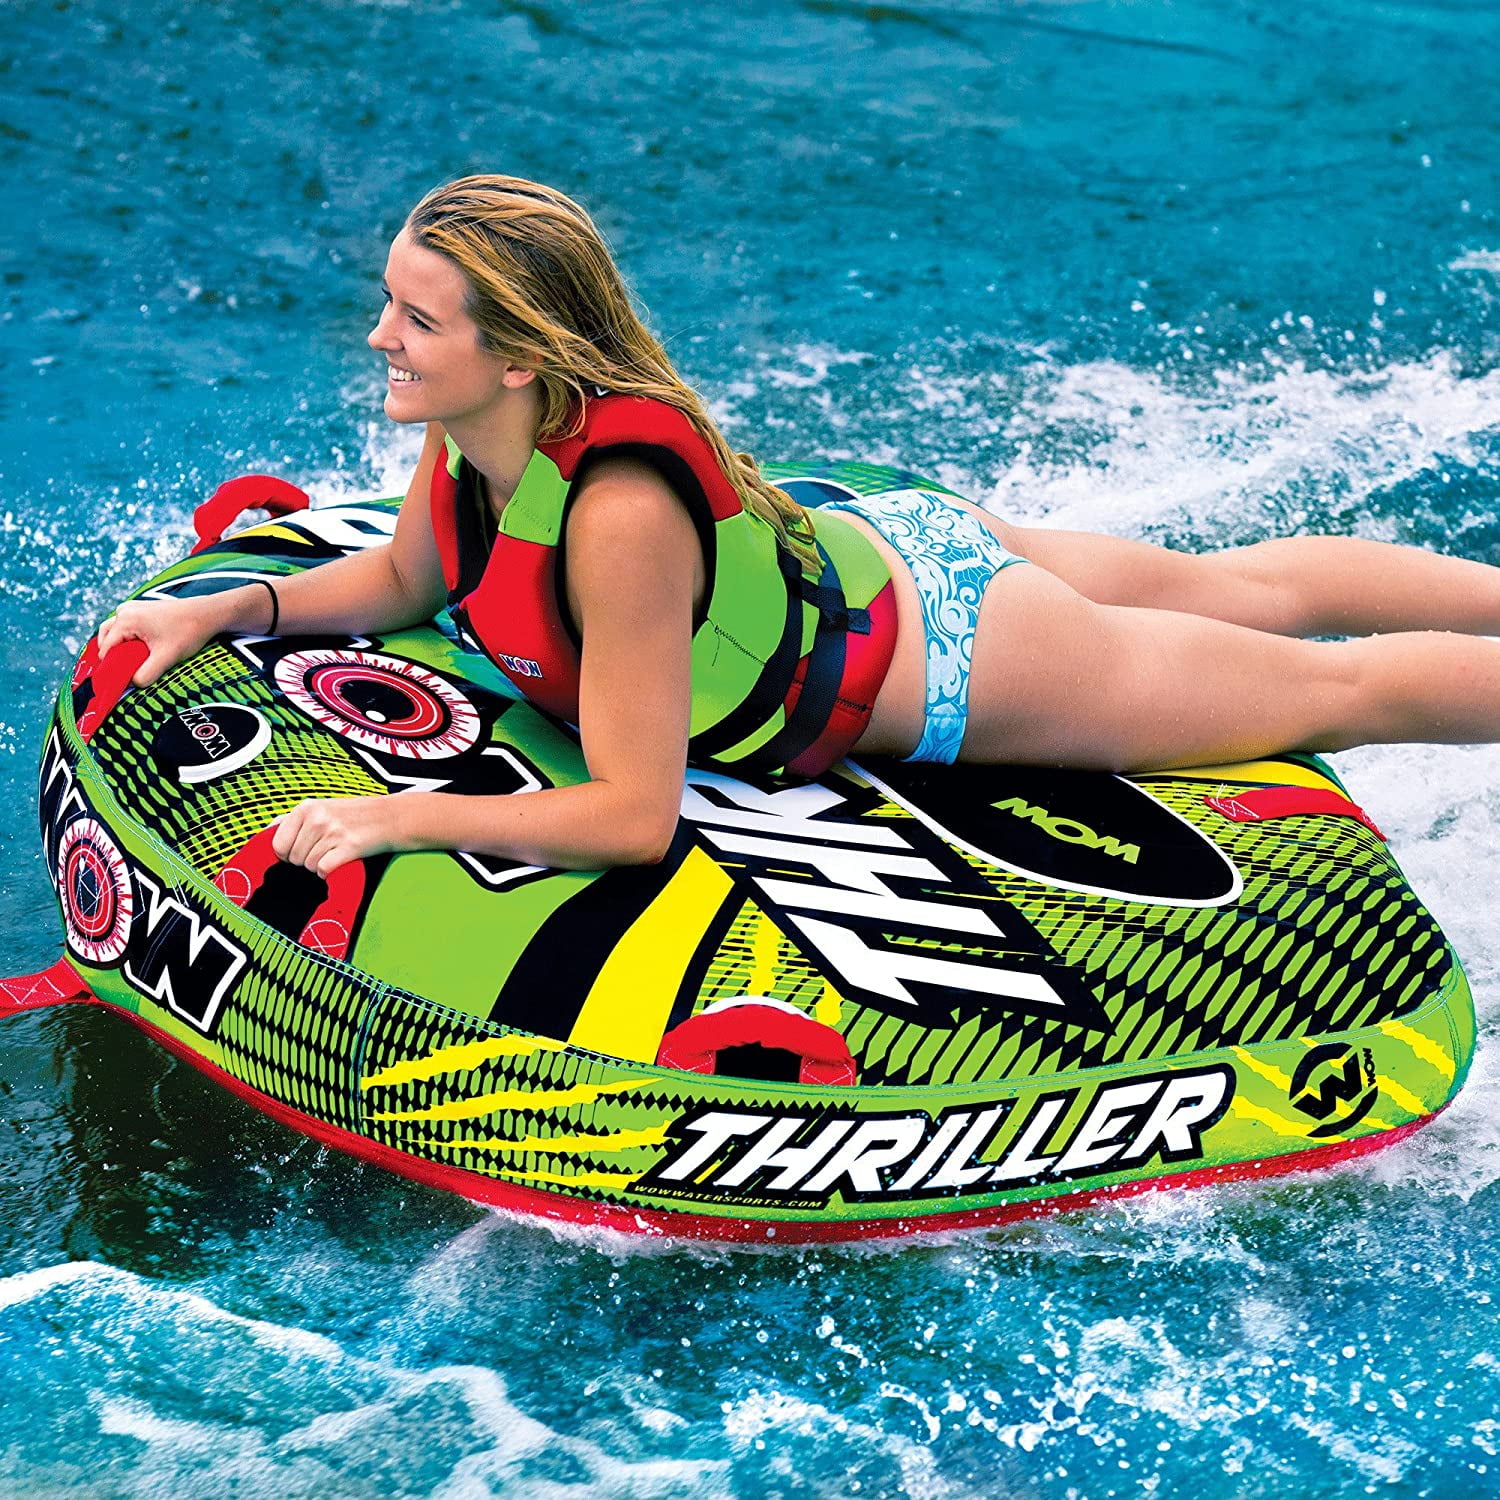 Water Sports Inflatables WOW Watersports Thriller Deck Tube Water Towable Tube Inflatable Boat Tube Towable Tube for Boating Wild Wake Action 